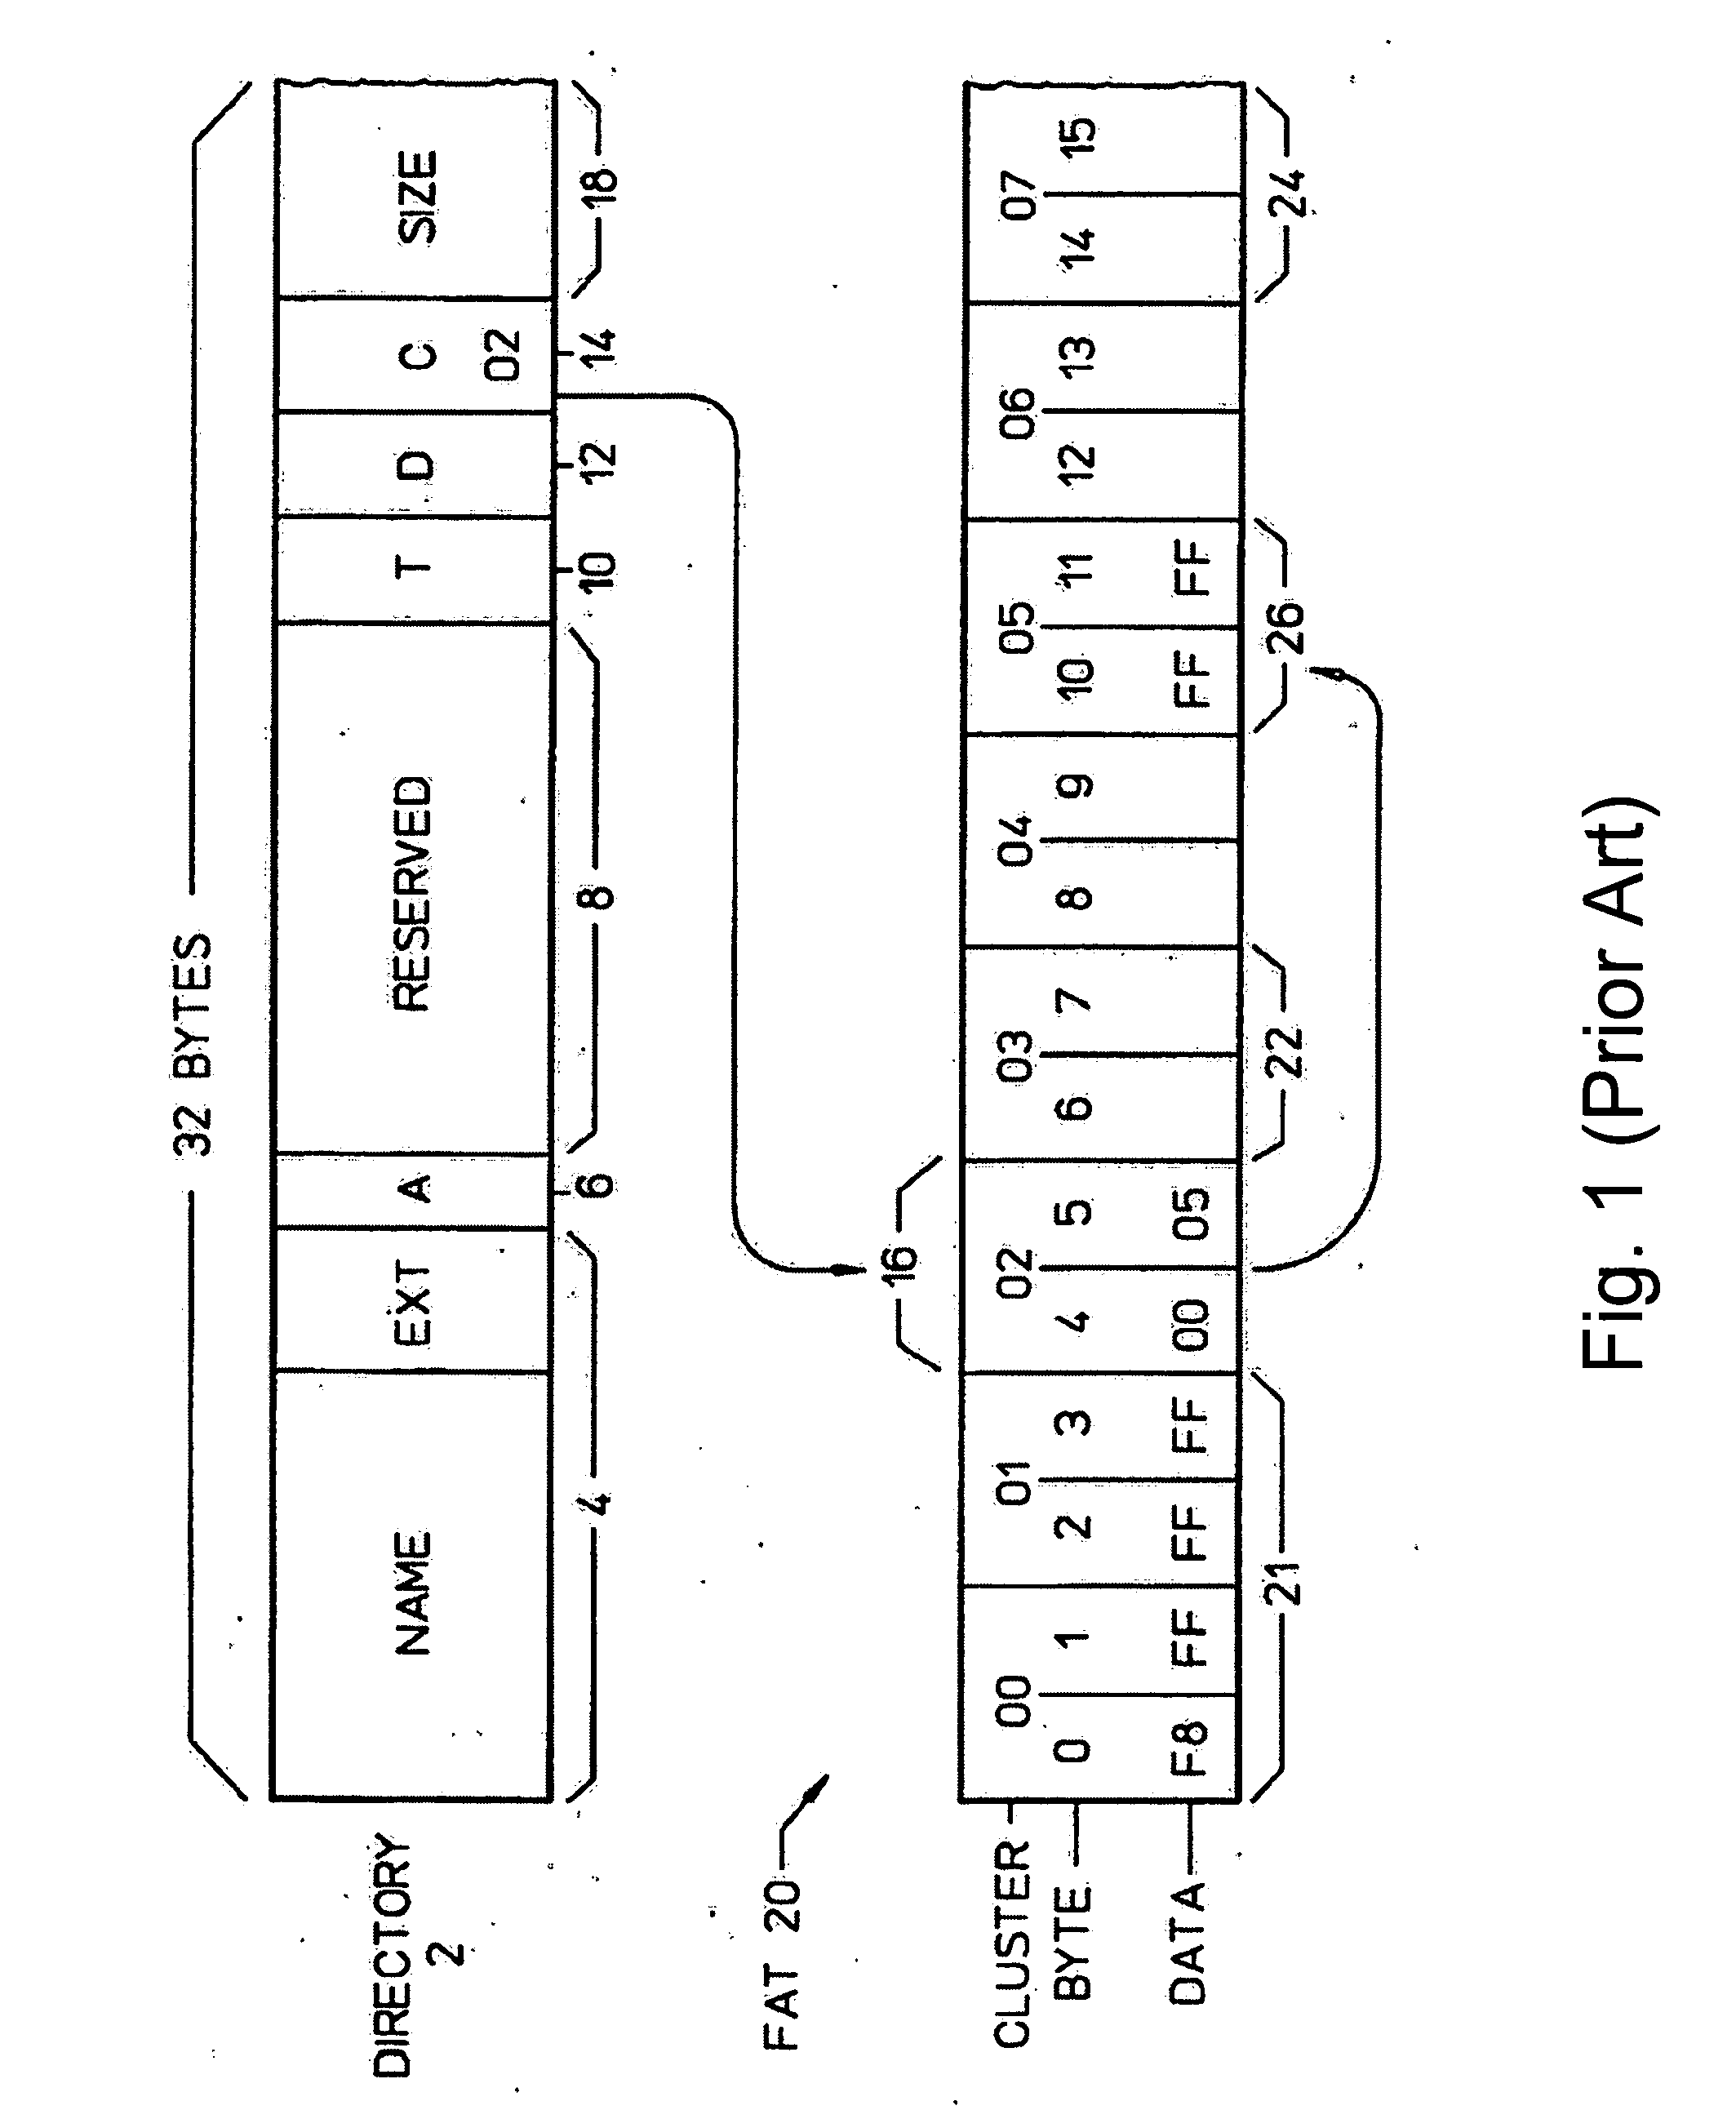 System and method for performing a snapshot and for restoring data